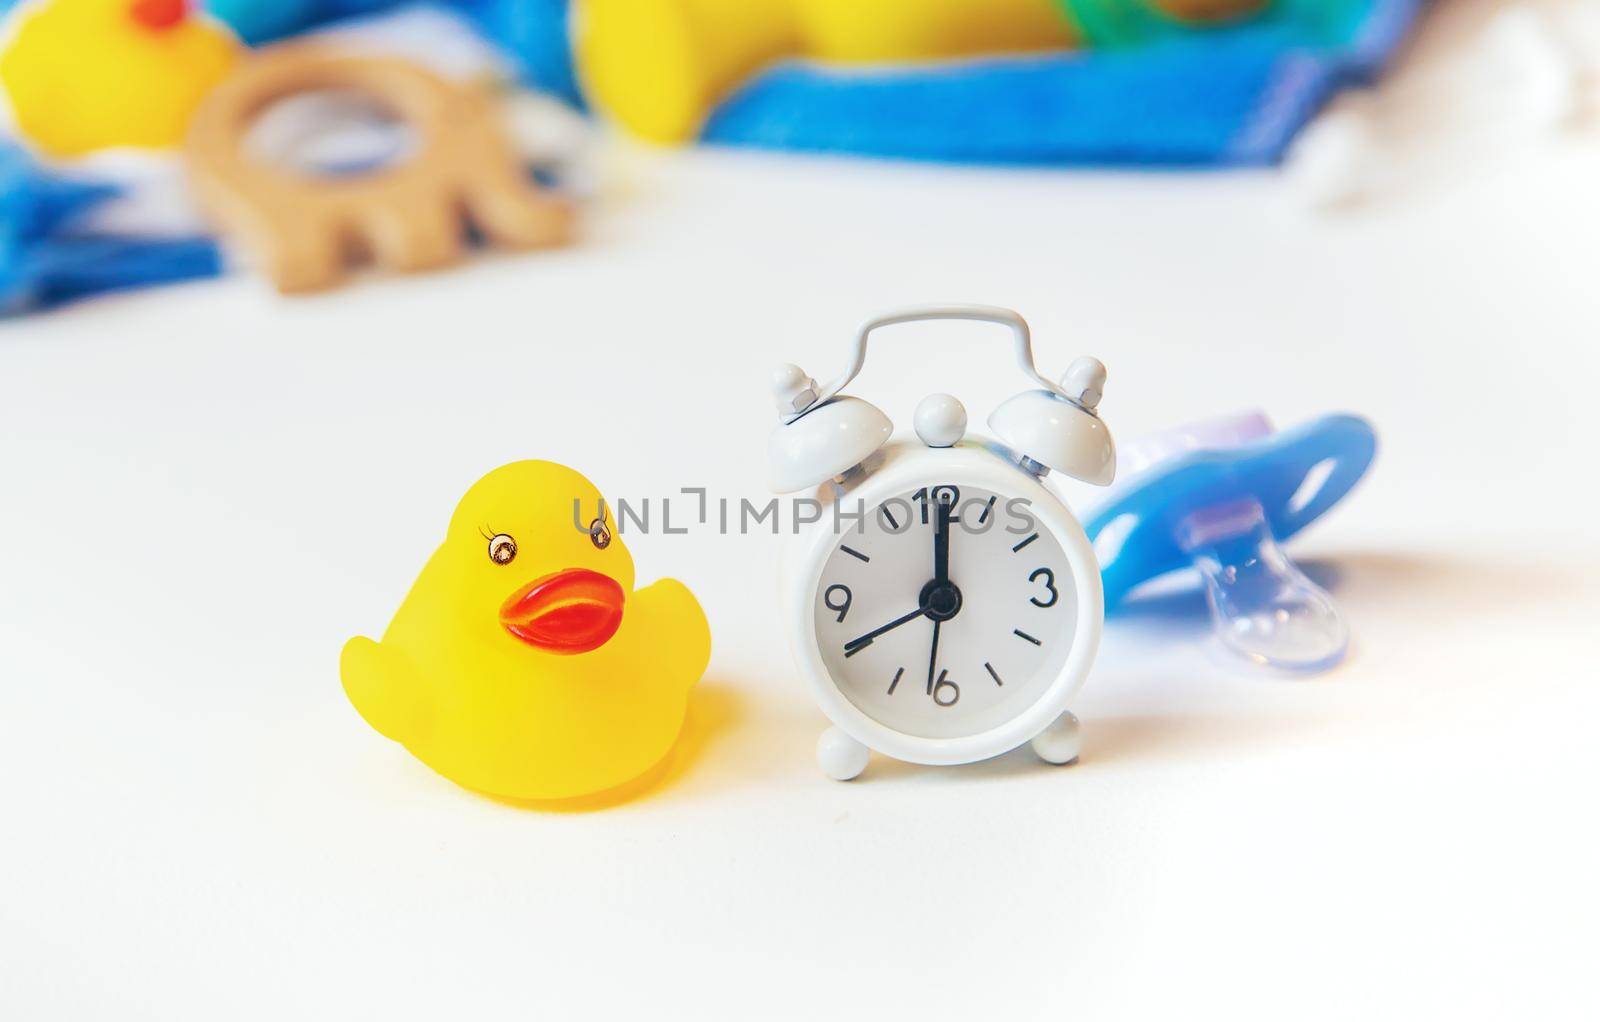 Baby bathing accessories on a white background. Selective focus.